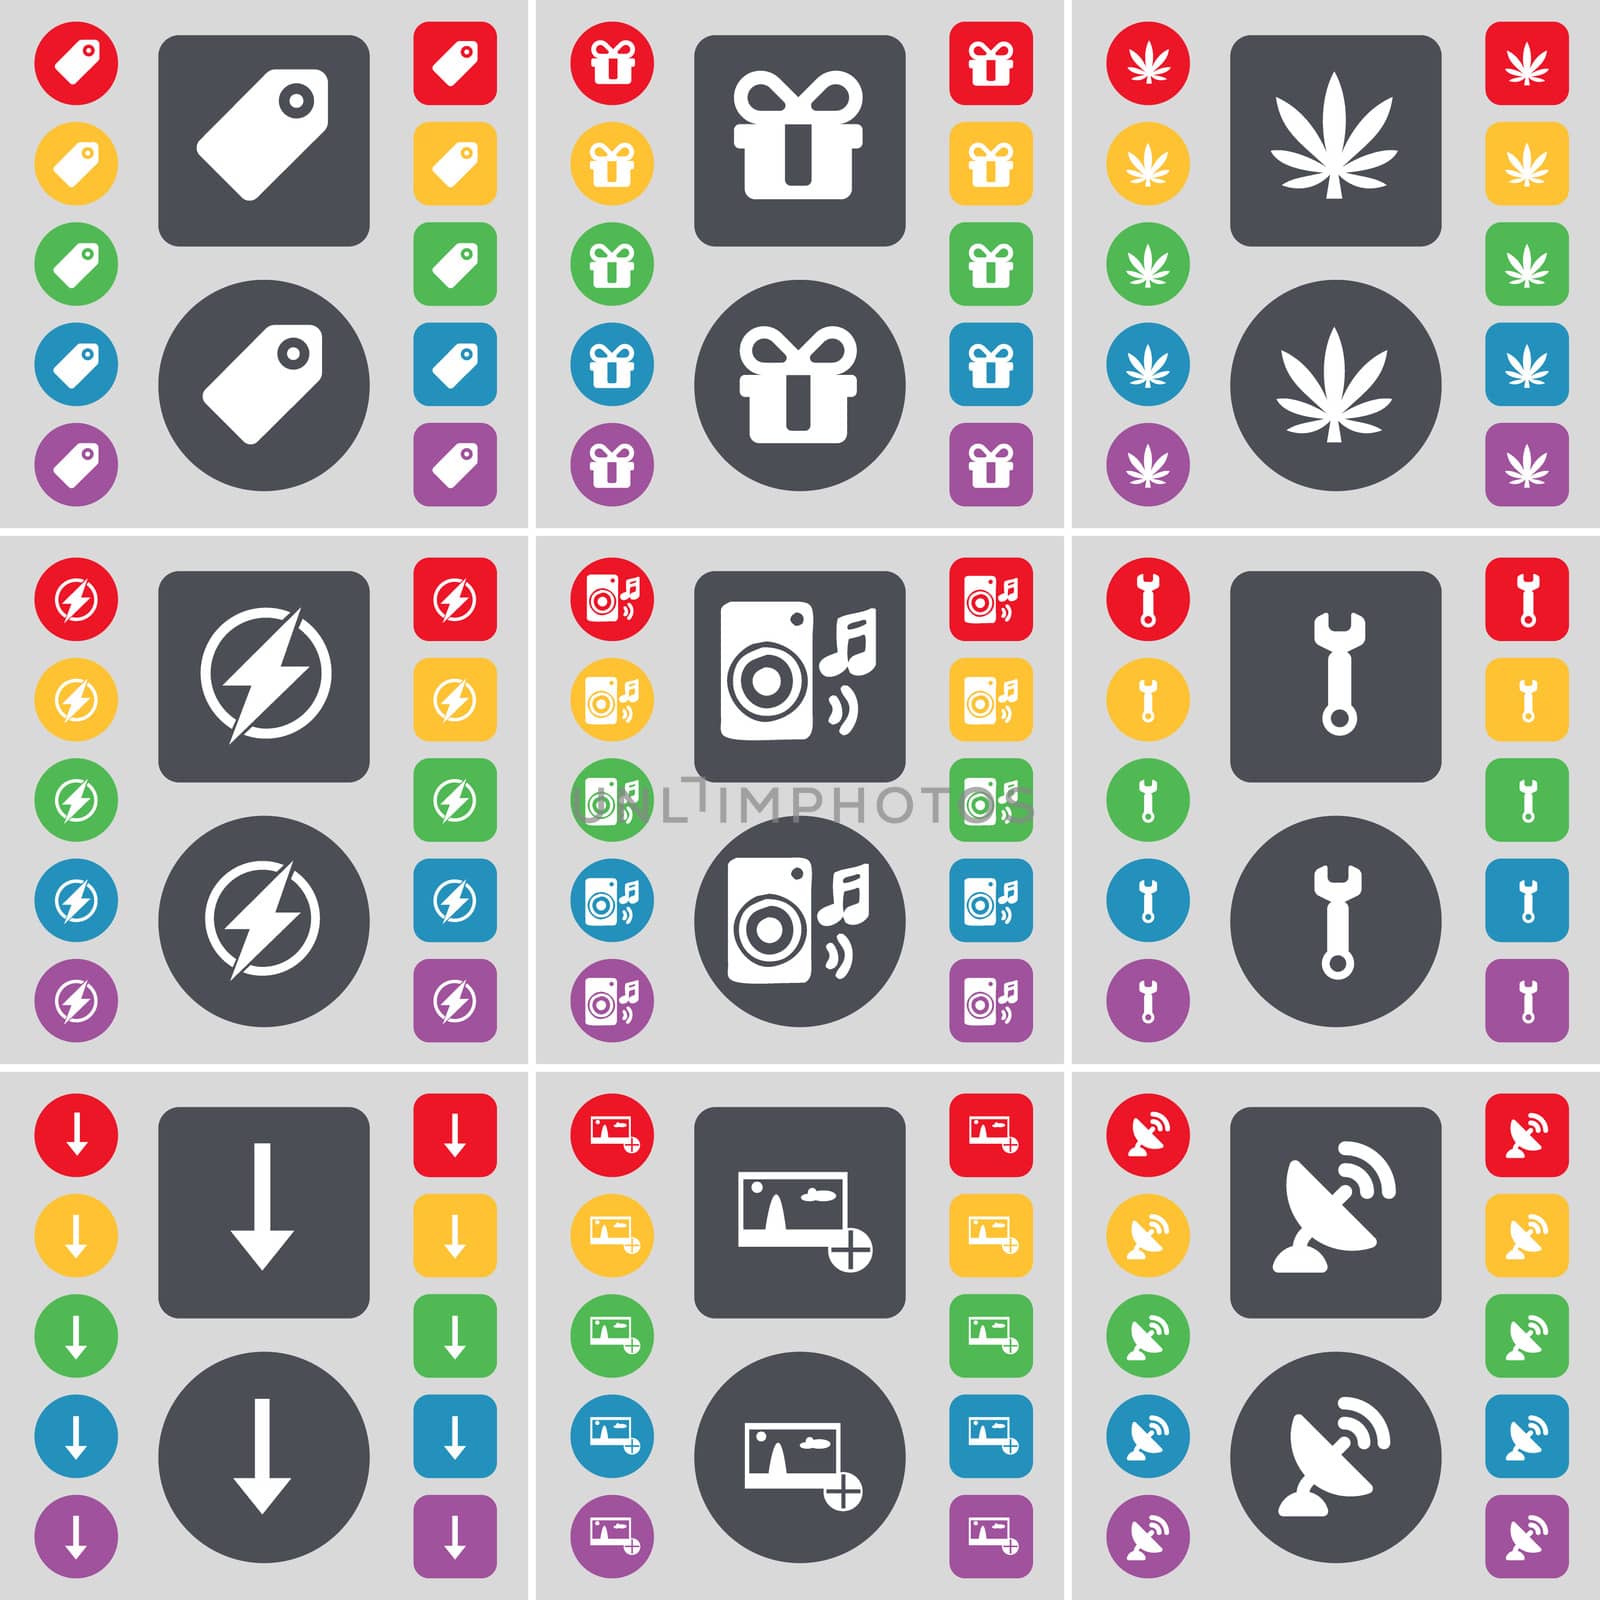 Tag, Gift, Marijuana, Flash, Speaker, Wrench, Arrow down, Picture, Satellite dish icon symbol. A large set of flat, colored buttons for your design. illustration